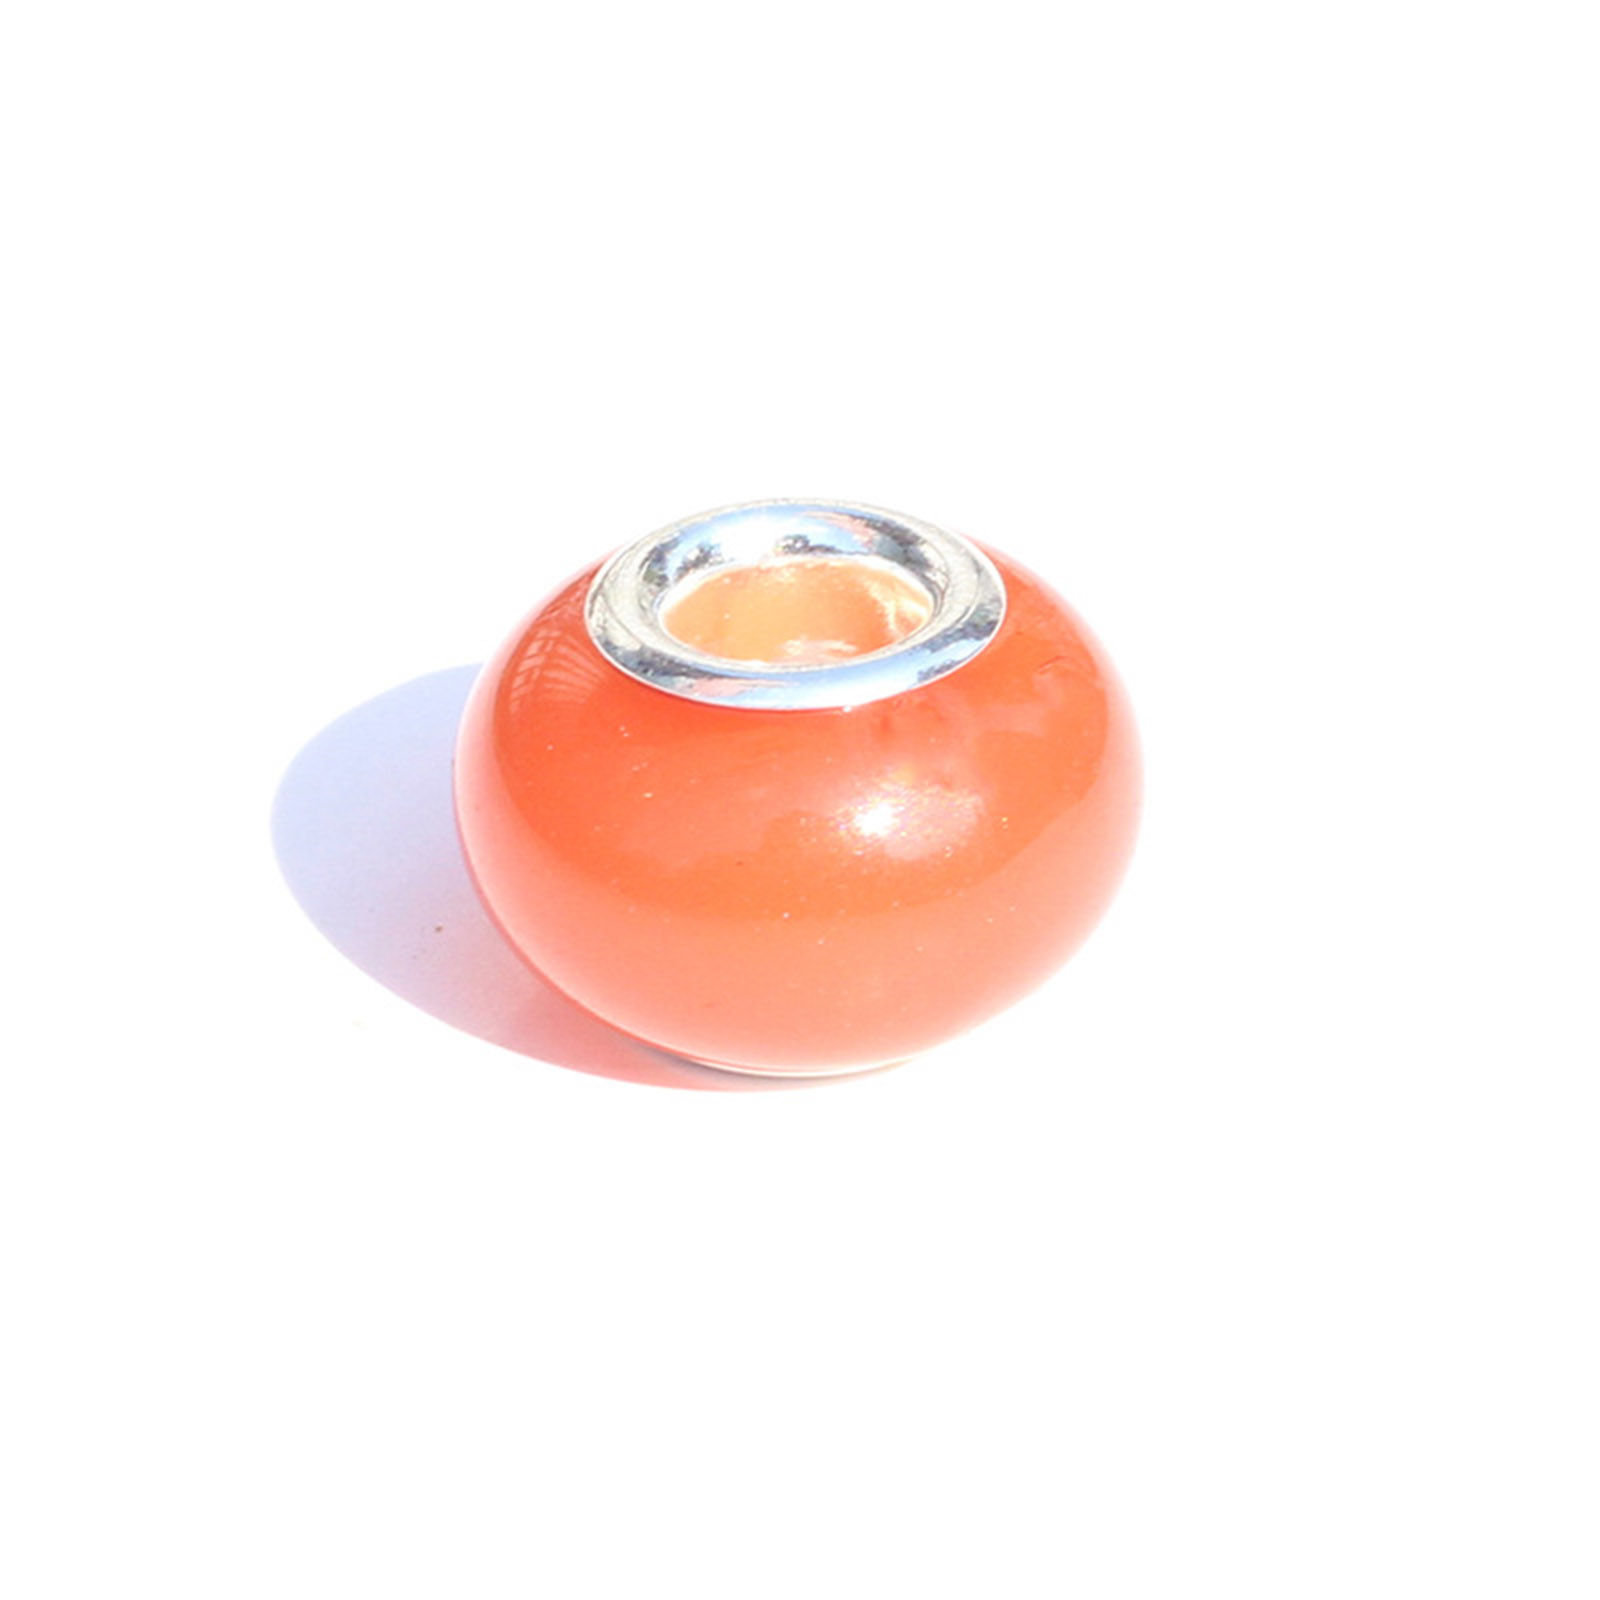 Picture of Resin European Style Large Hole Charm Beads Orange Round Glow In The Dark Luminous 14mm x 9mm, Hole: Approx 5mm, 20 PCs